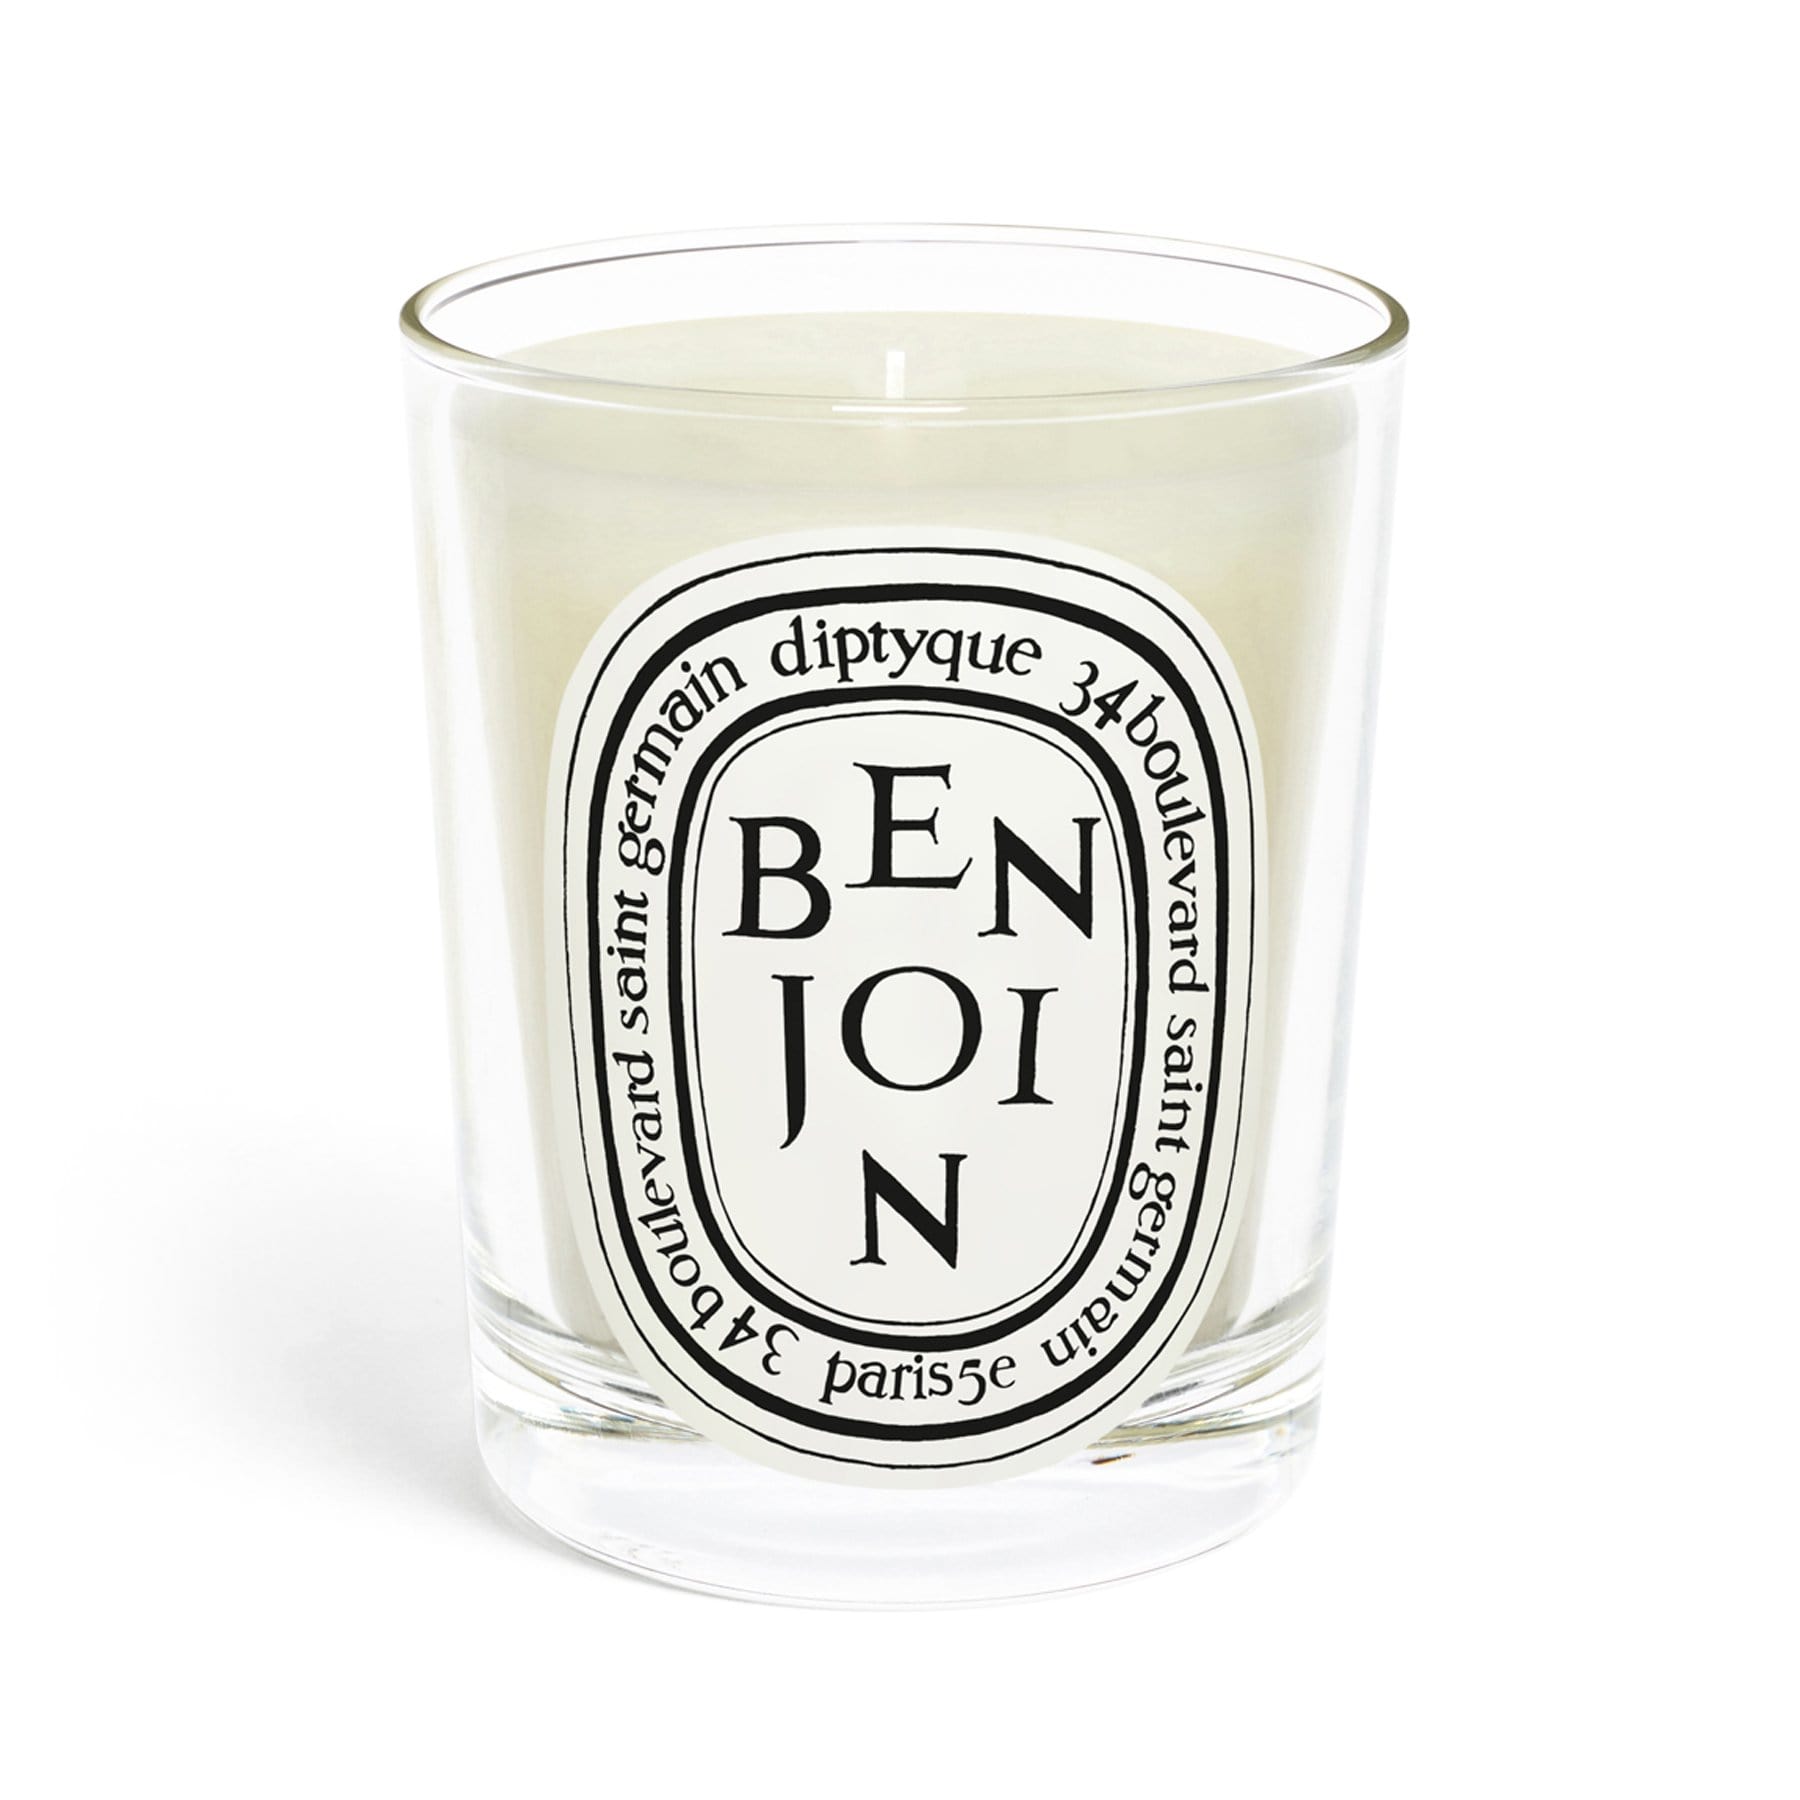 Benjoin Diptyque Scented candle